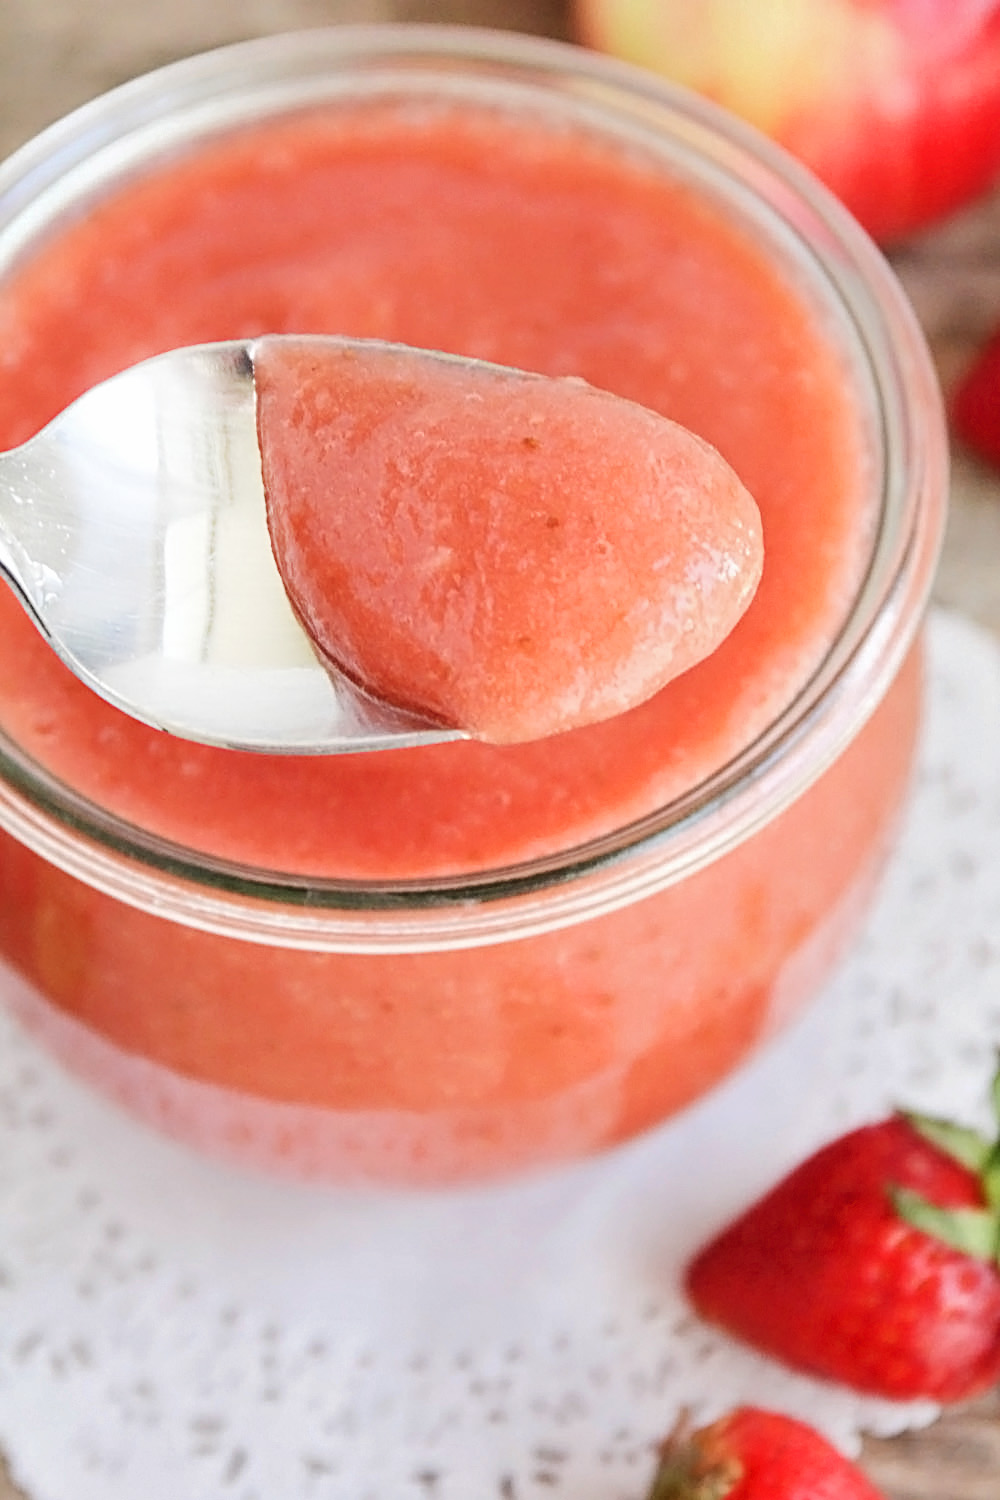 This homemade strawberry applesauce is so delicious and better than store-bought! It takes just thirty minutes to make and is so flavorful!